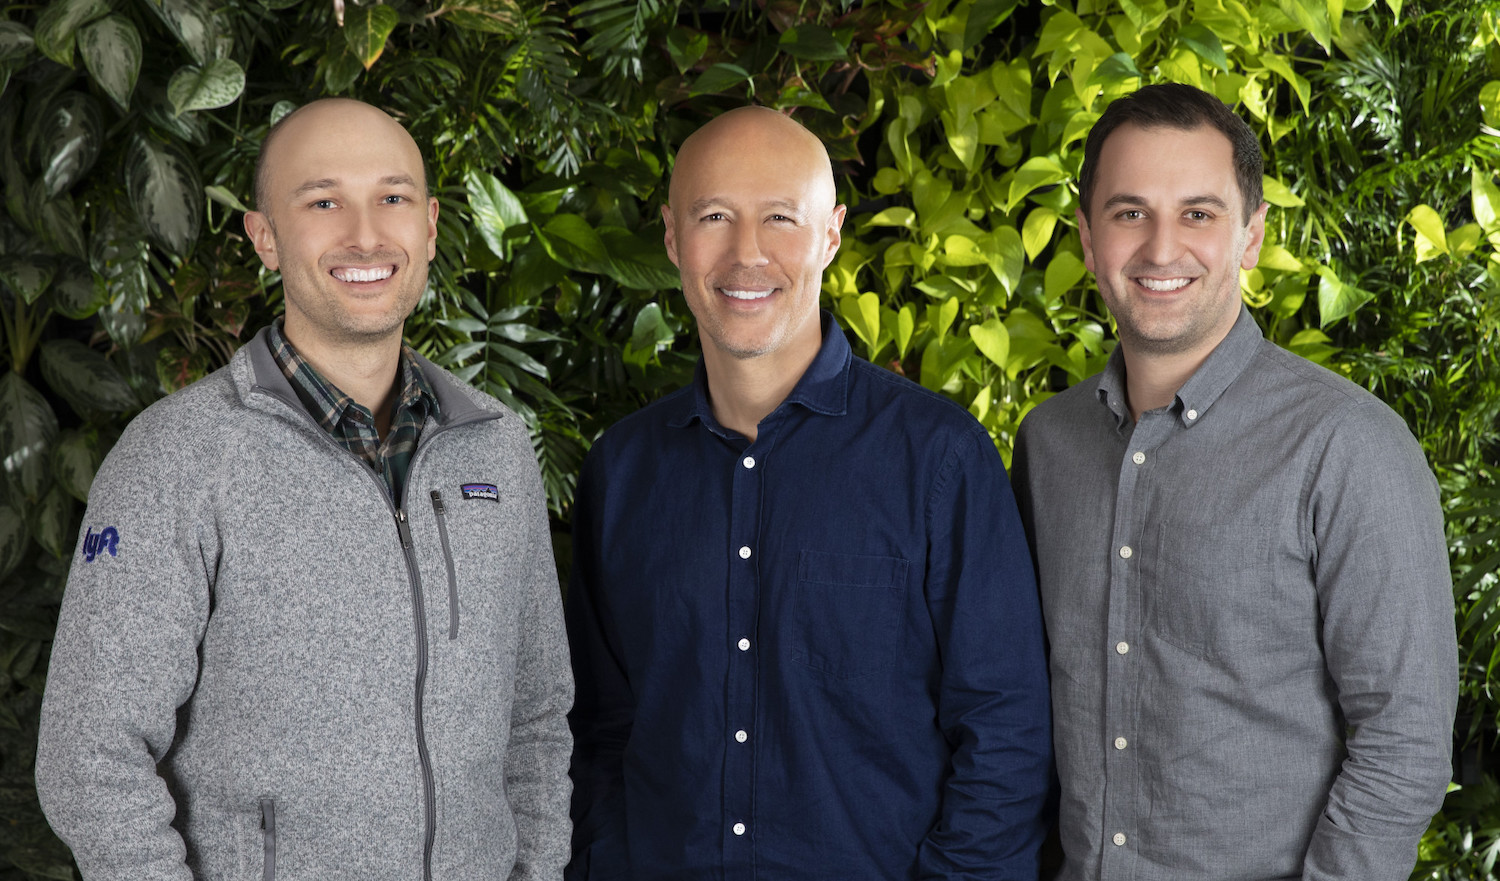 Lyft co-founder and CEO Logan Green (left) is pictured with incoming Lyft CEO David Risher (center) and Lyft co-founder and President John Zimmer (right). | Photo: Lyft